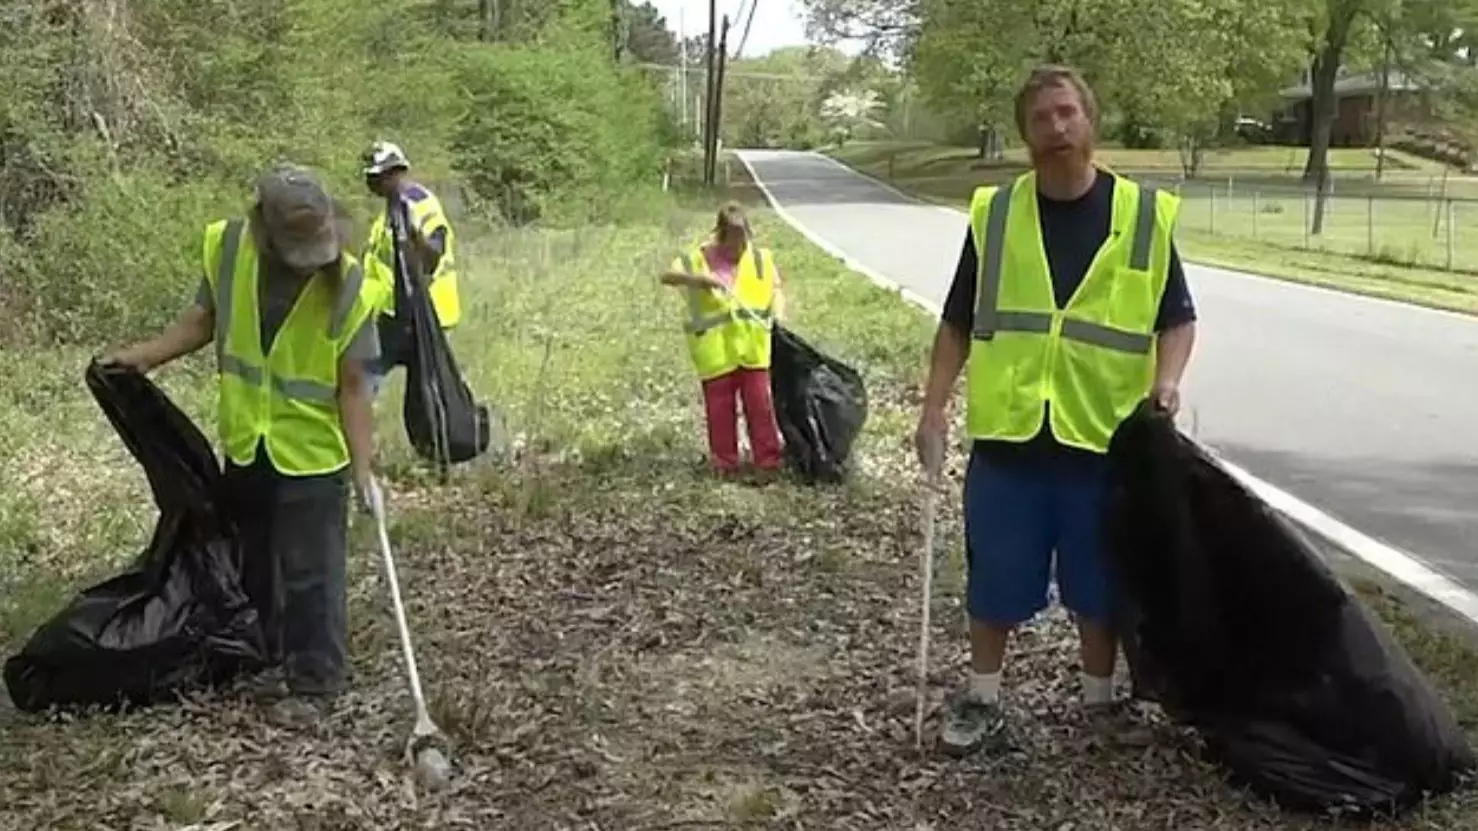 Arkansas City Is Paying $9.25 An Hour For Homeless People To Pick Up Litter